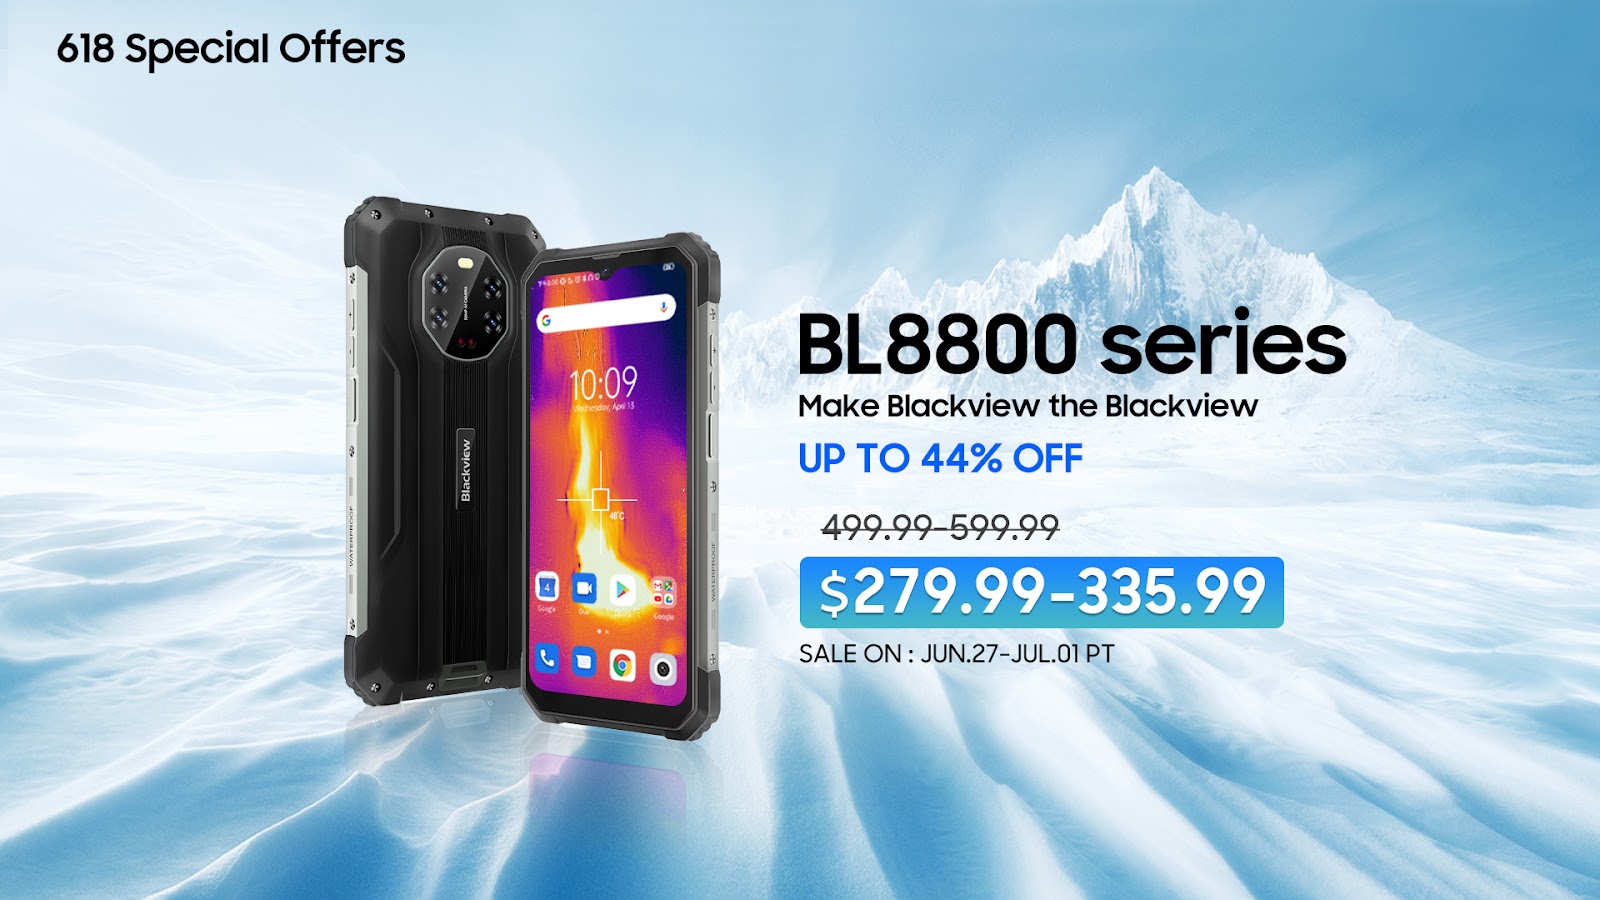 Blackview 618 summer sale 2022 goes live; massive discounts up to $264 off img 62b57cce3ed0c